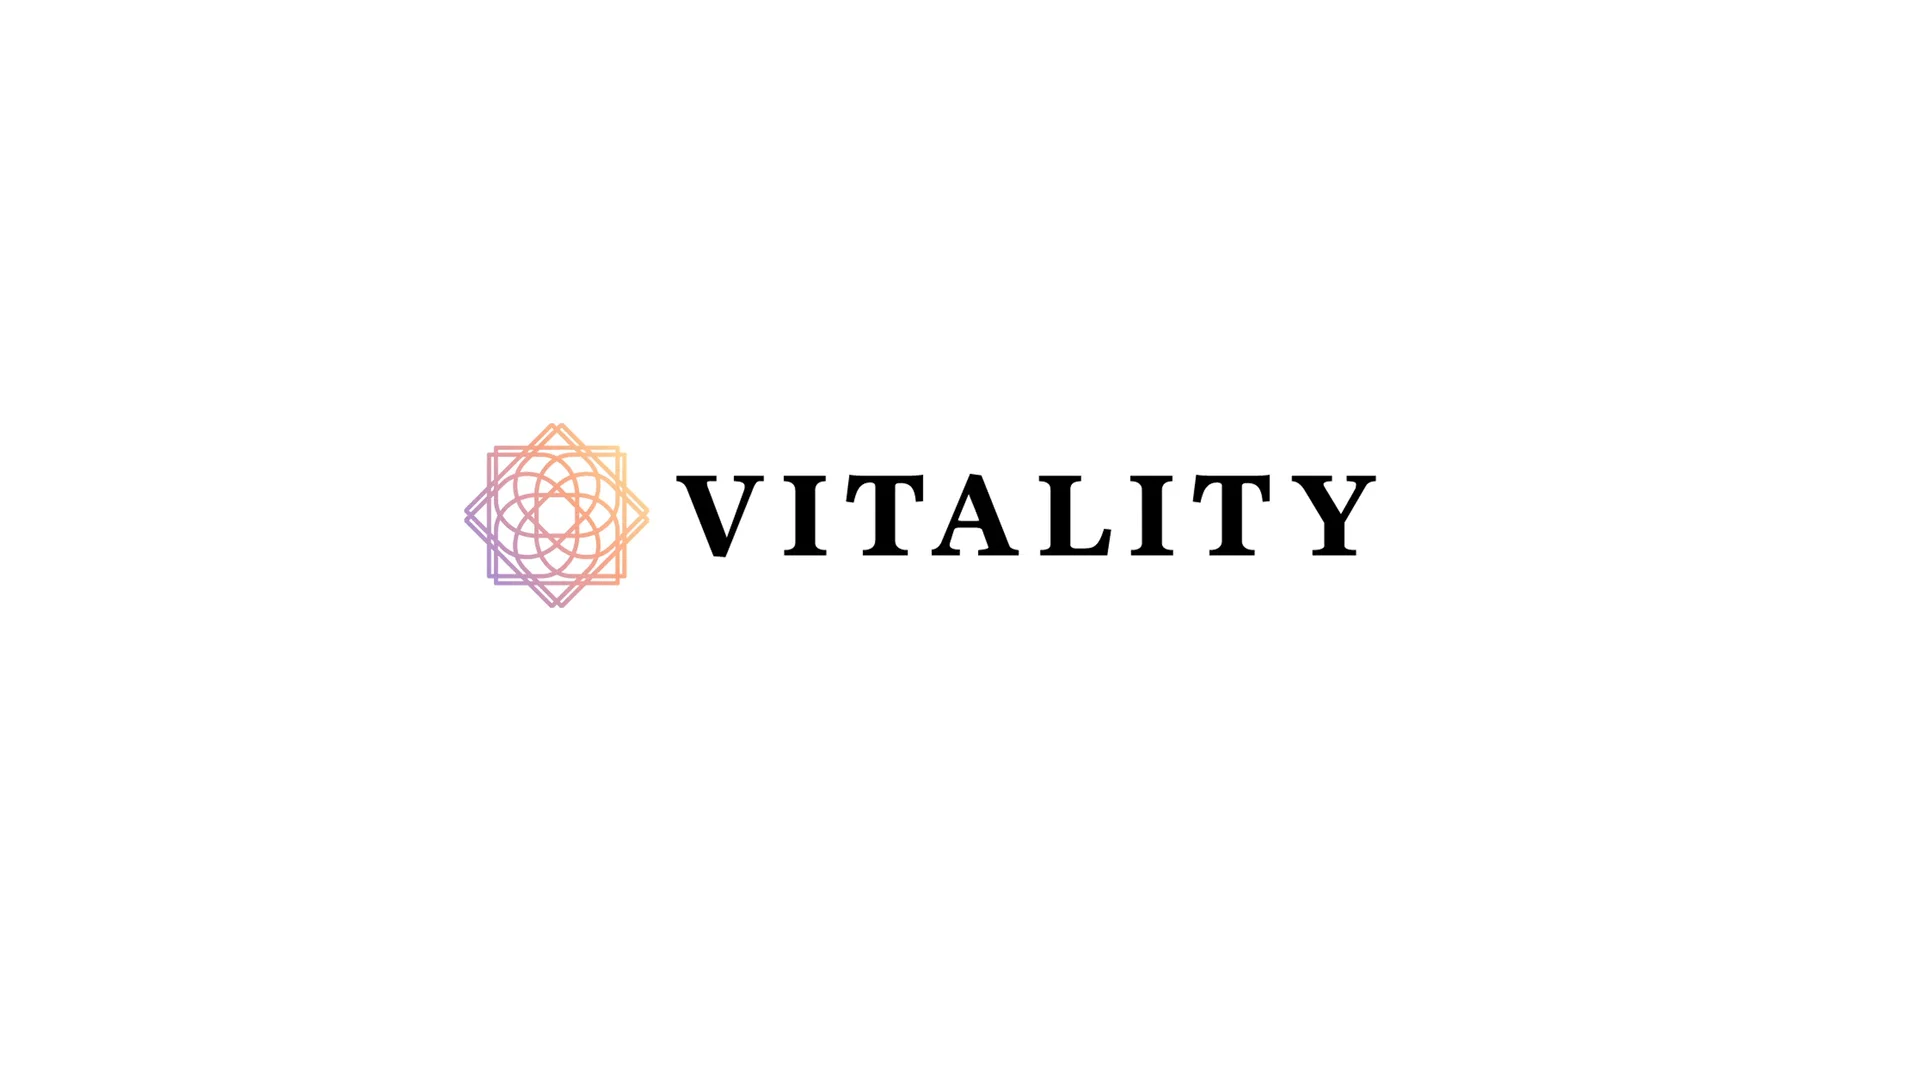 Vitality Extracts - Skin Envy Essential Oil on Vimeo